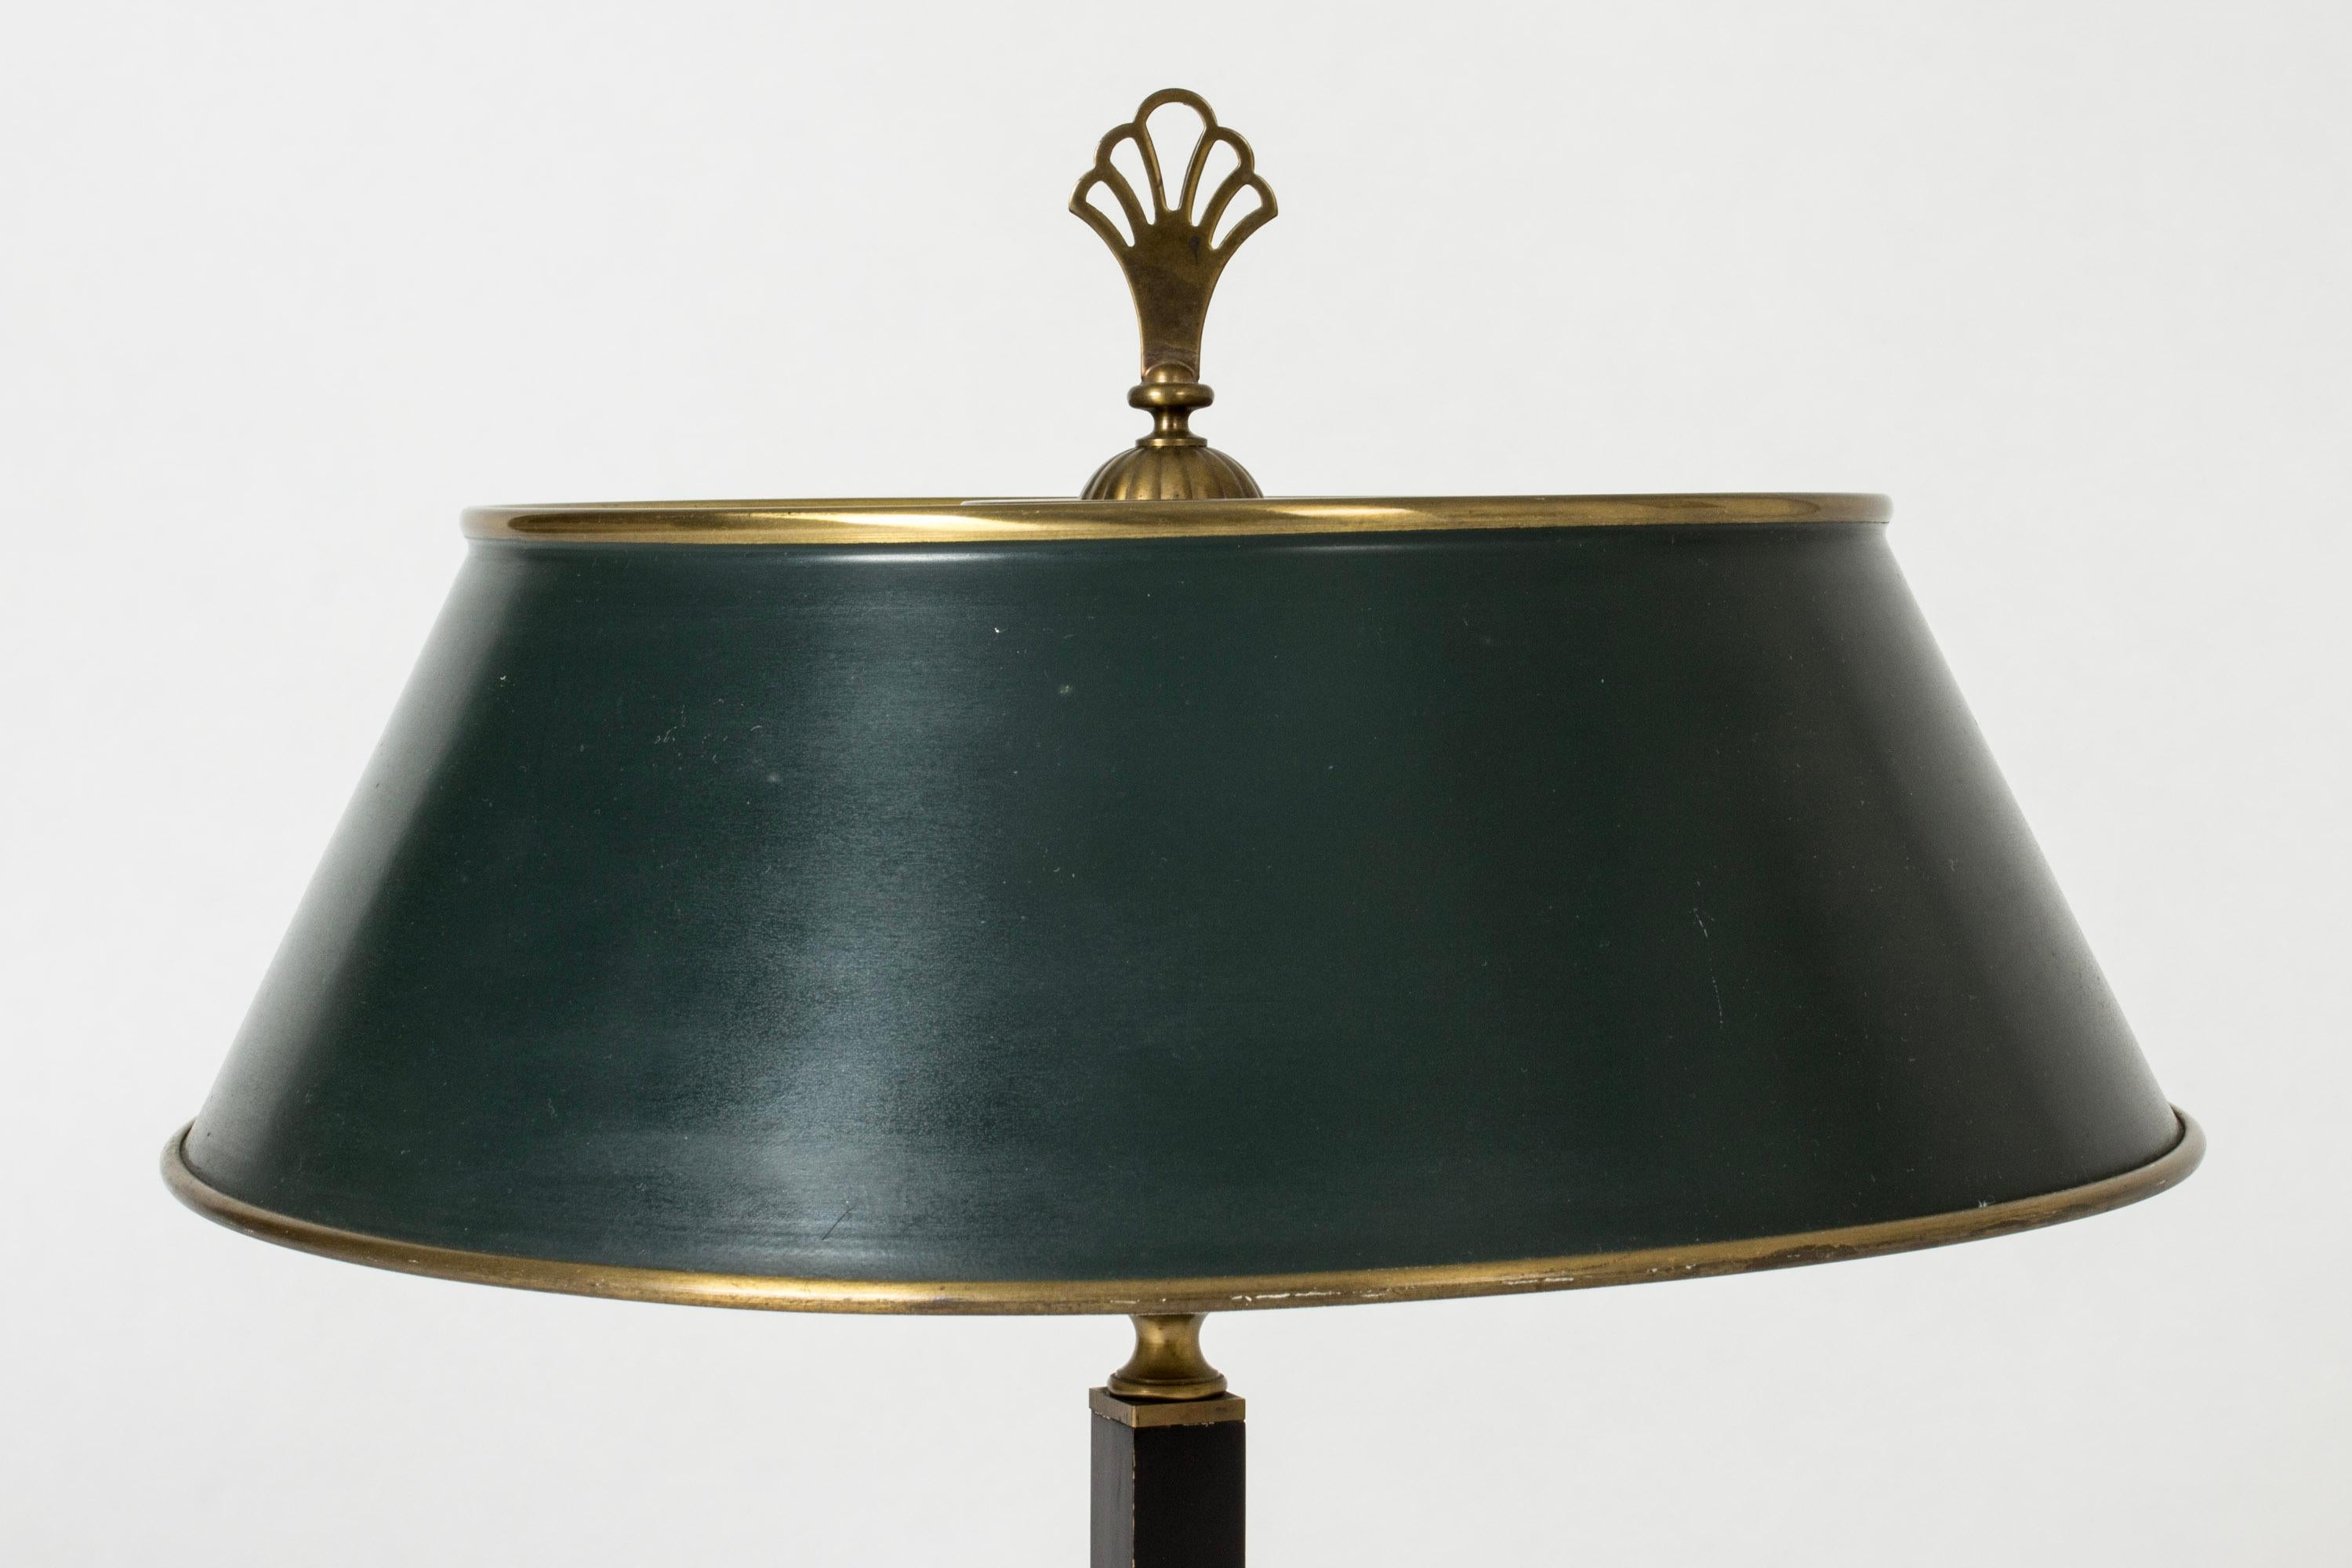 Elegant table lamp from Böhlmarks, made from brass with a green lacquered shade. Lovely decorative details on the top and handle.